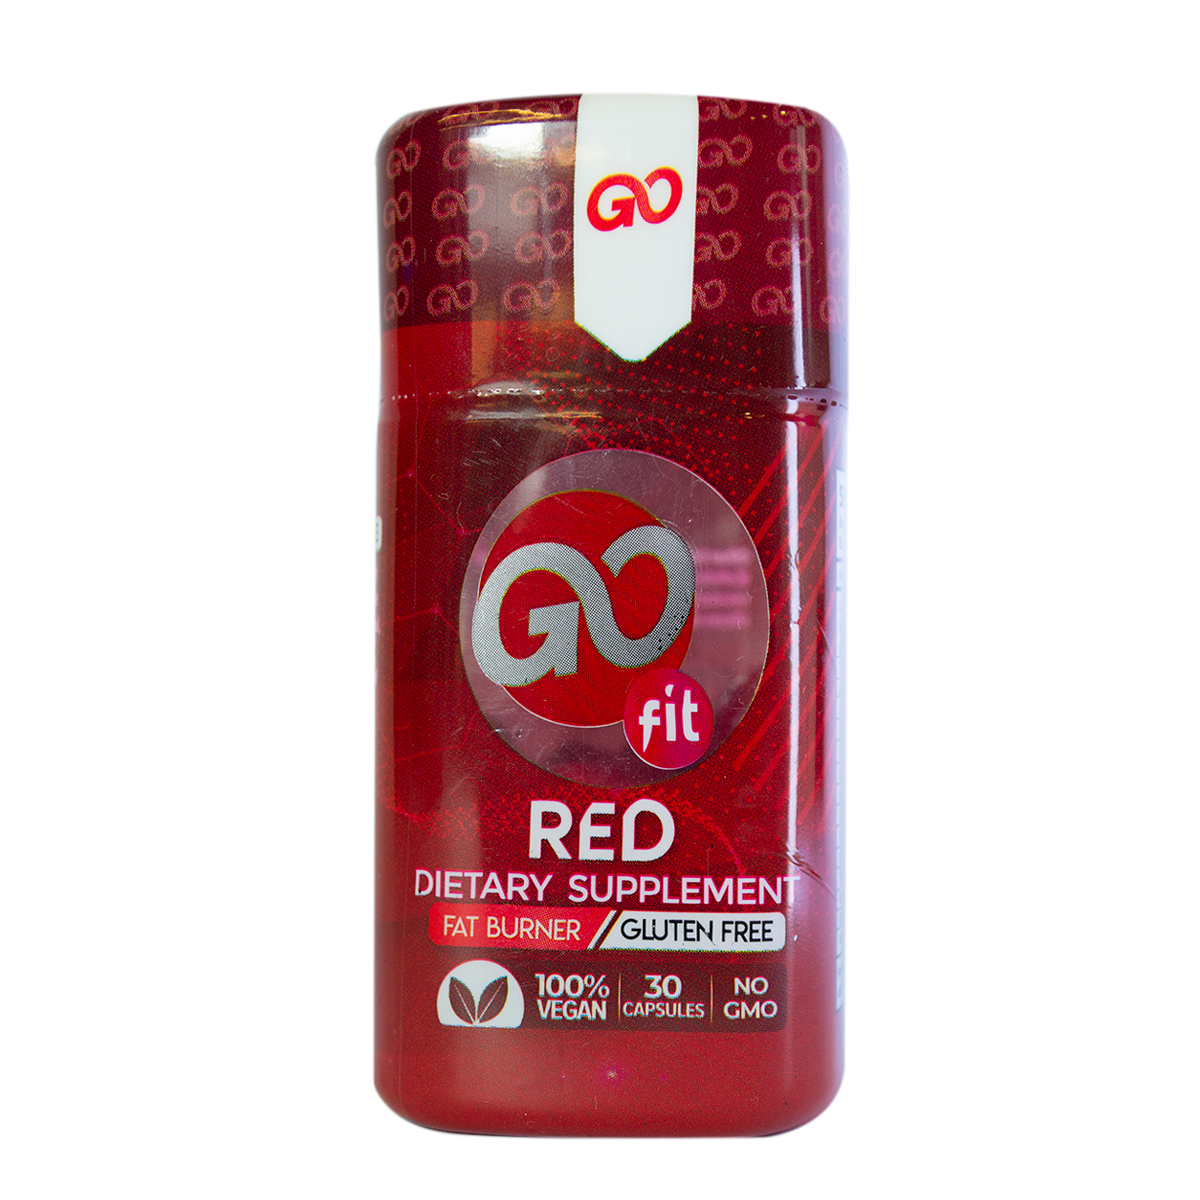 GO FIT RED - MUNDO FIT USA